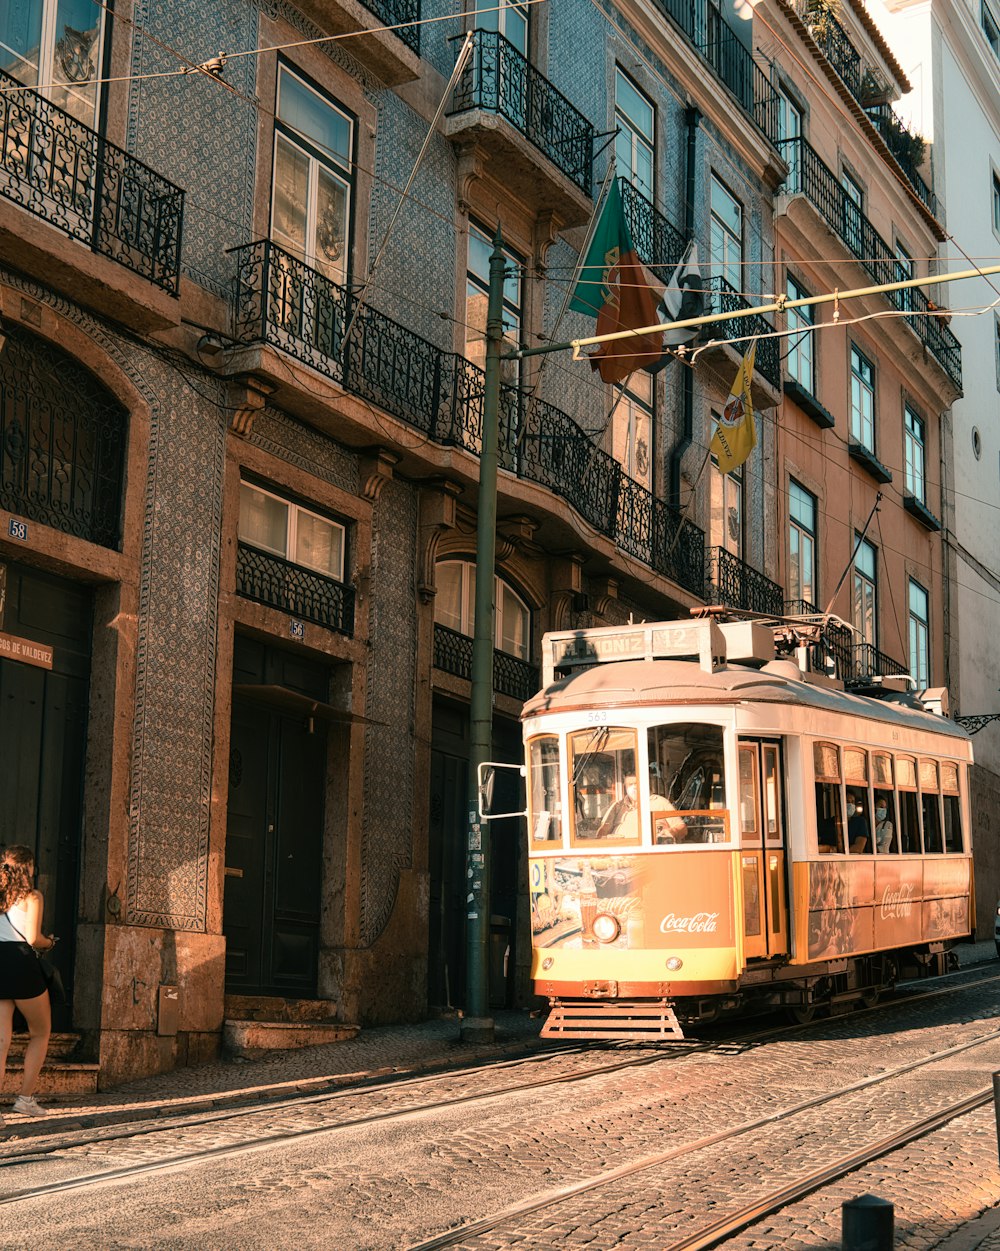 a trolley car on the tracks in front of a building